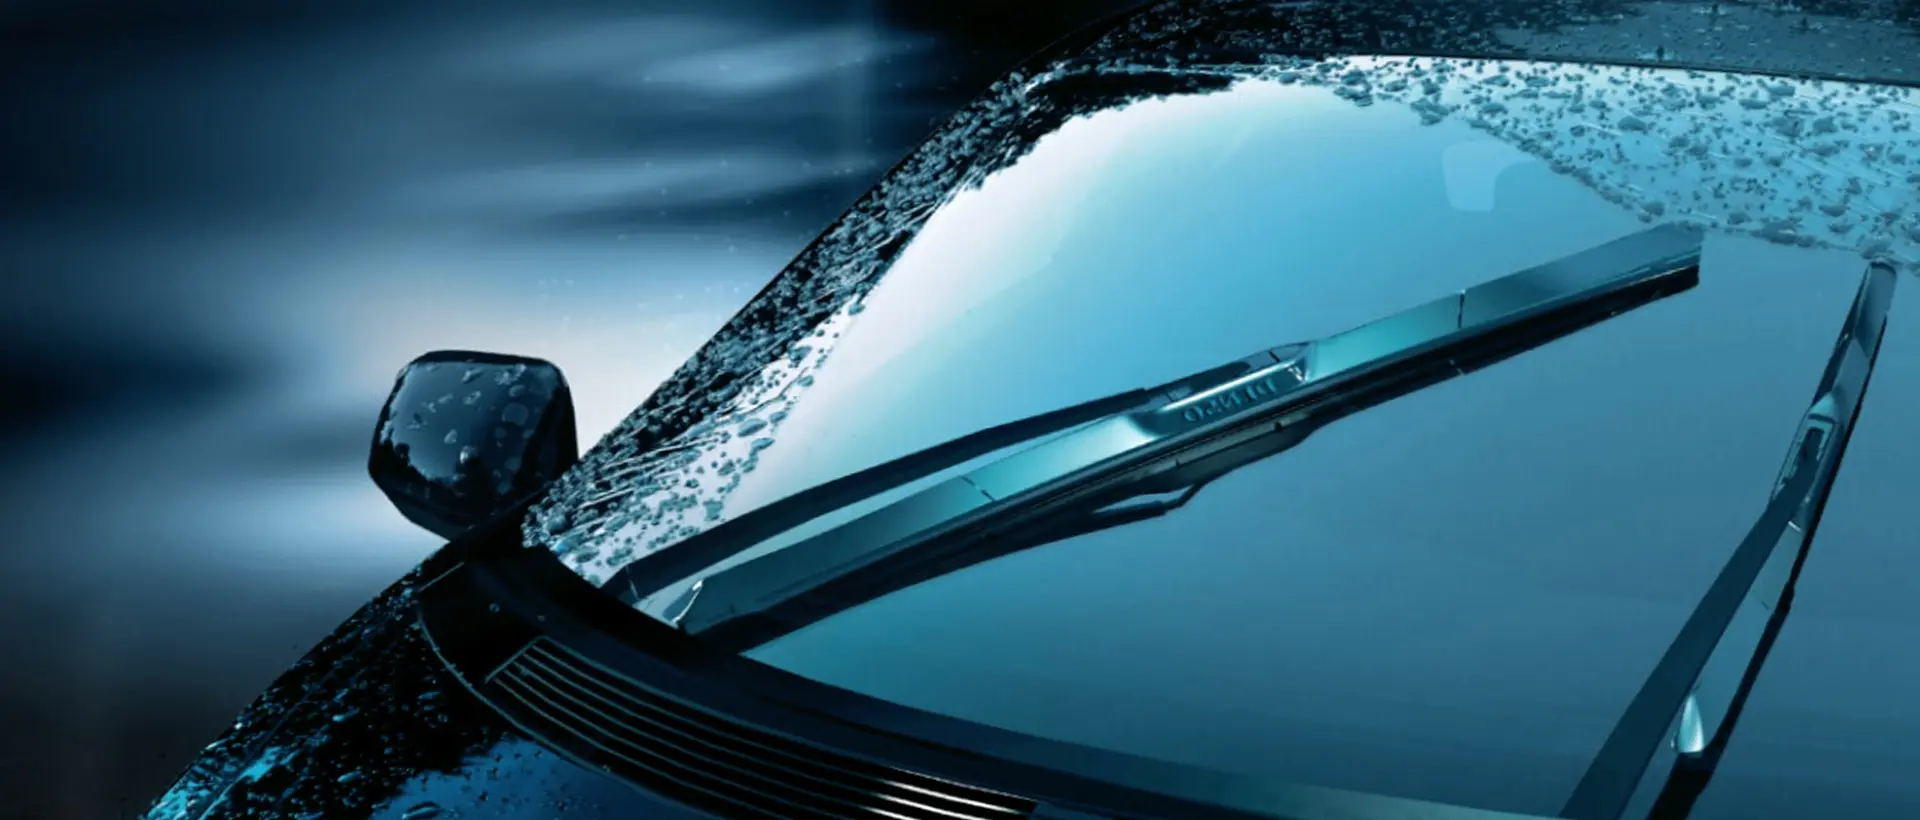 Special wipers are designed to provide better contact with the windshield